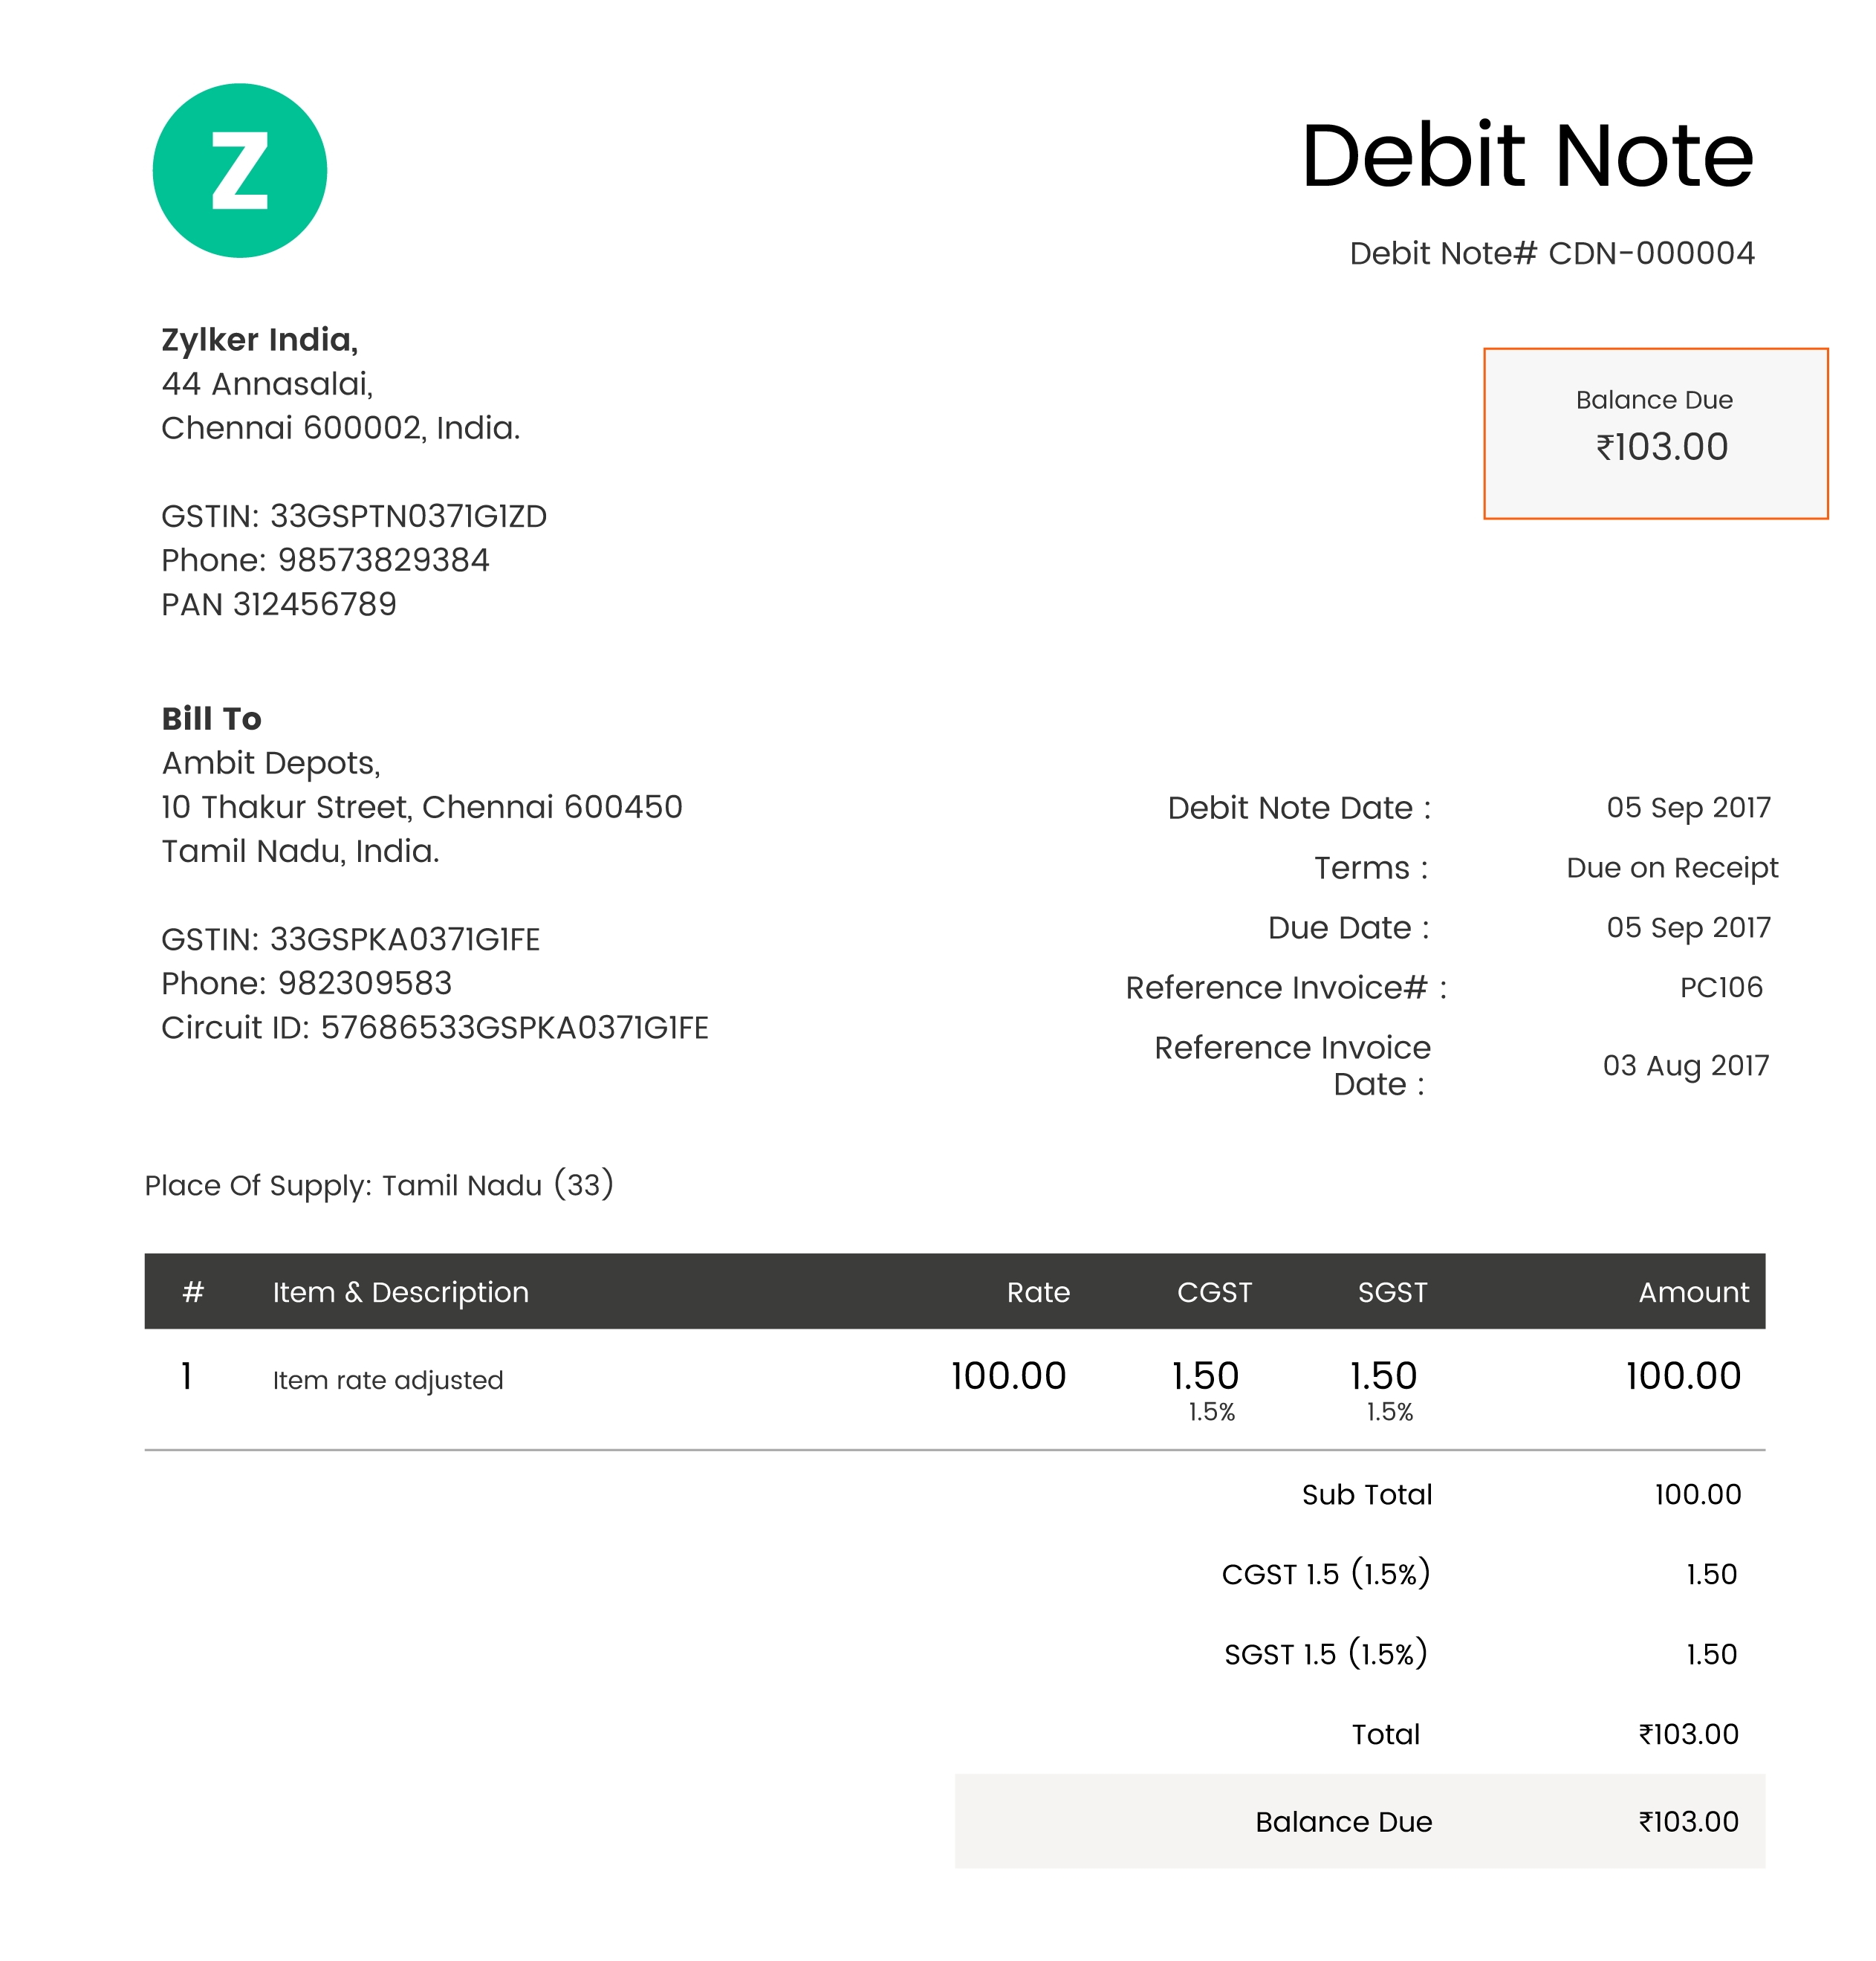 debit note and invoice domaregroup debit note and credit note in gst